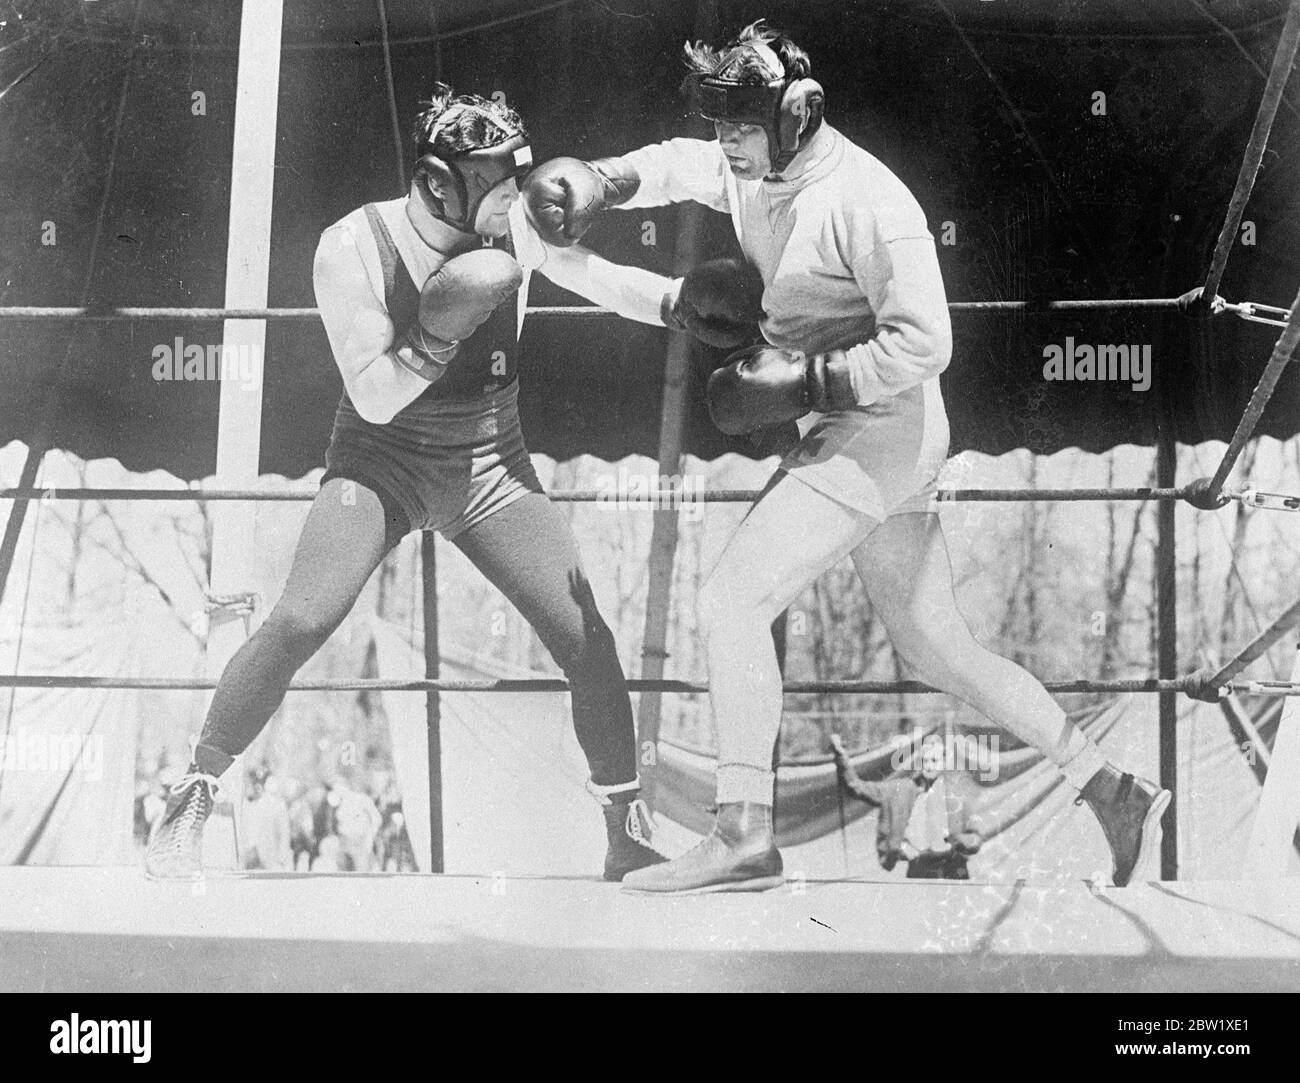 World's champion trains to defend title. James J. Braddock, world's heavyweight boxing champion, is training at Grand Beach, Michigan, to defend his title against Joe Lewis in Chicago next month. Photo shows: James J. Braddock (right) sparring with Jack McCarthy at his Michigan camp. 26 May 1937 [?] Stock Photo